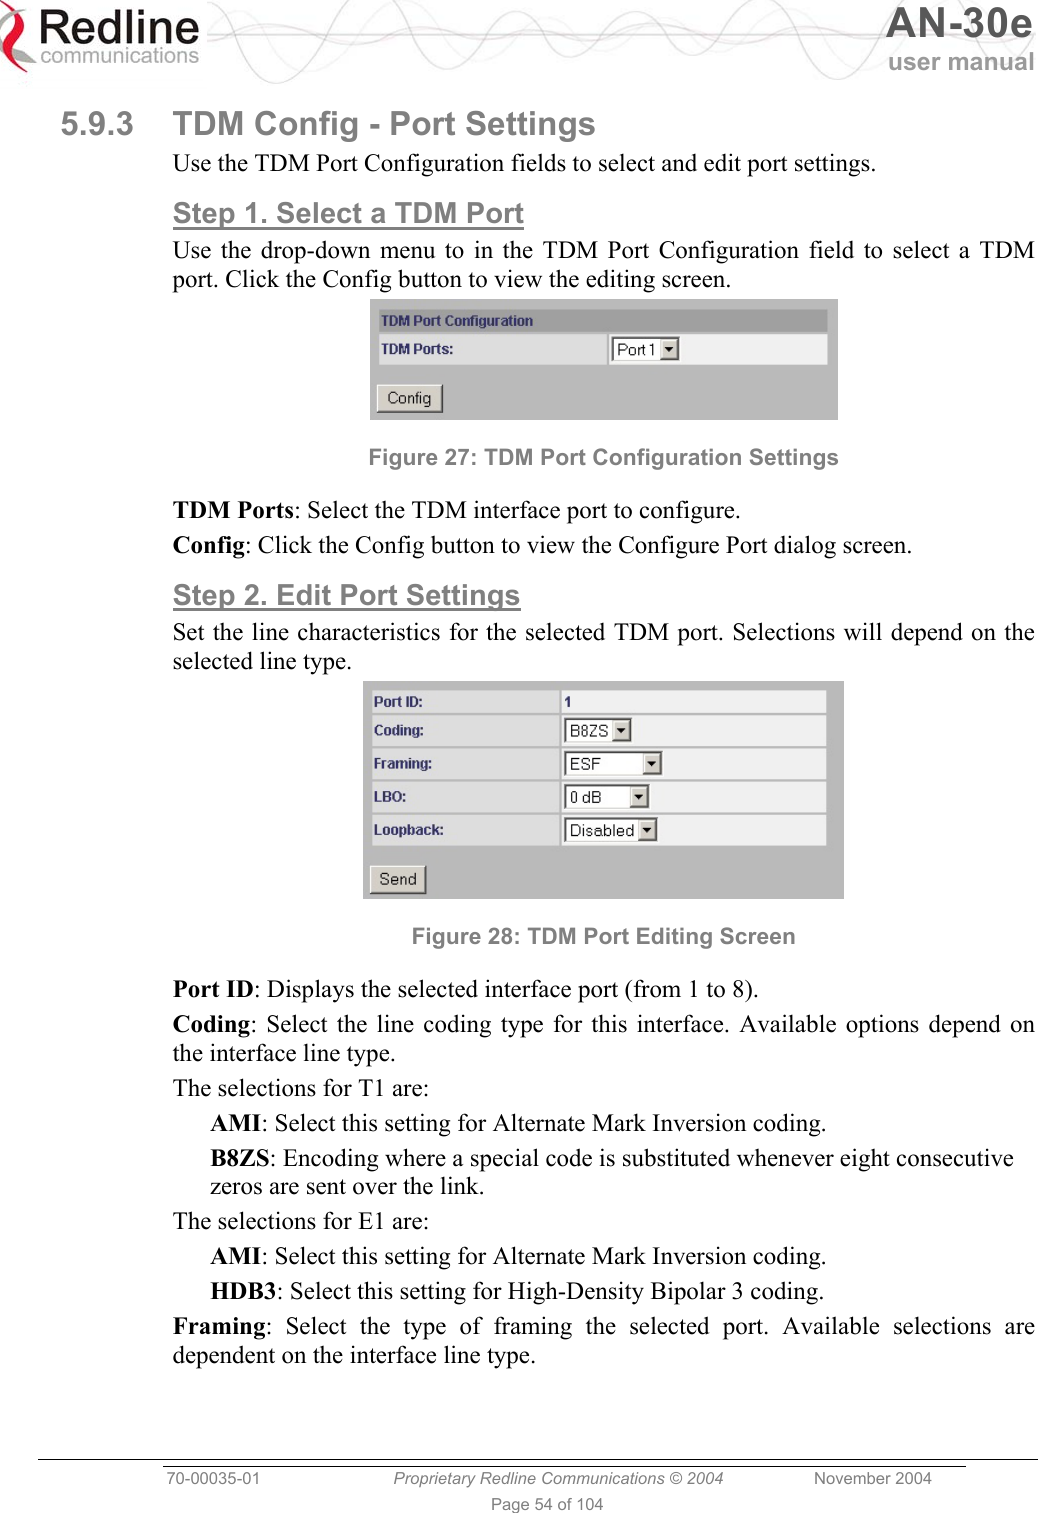   AN-30e user manual  70-00035-01  Proprietary Redline Communications © 2004 November 2004   Page 54 of 104 5.9.3  TDM Config - Port Settings Use the TDM Port Configuration fields to select and edit port settings. Step 1. Select a TDM Port Use the drop-down menu to in the TDM Port Configuration field to select a TDM port. Click the Config button to view the editing screen.  Figure 27: TDM Port Configuration Settings TDM Ports: Select the TDM interface port to configure. Config: Click the Config button to view the Configure Port dialog screen. Step 2. Edit Port Settings  Set the line characteristics for the selected TDM port. Selections will depend on the selected line type.  Figure 28: TDM Port Editing Screen Port ID: Displays the selected interface port (from 1 to 8). Coding: Select the line coding type for this interface. Available options depend on the interface line type. The selections for T1 are: AMI: Select this setting for Alternate Mark Inversion coding. B8ZS: Encoding where a special code is substituted whenever eight consecutive zeros are sent over the link. The selections for E1 are: AMI: Select this setting for Alternate Mark Inversion coding. HDB3: Select this setting for High-Density Bipolar 3 coding.  Framing: Select the type of framing the selected port. Available selections are dependent on the interface line type. 